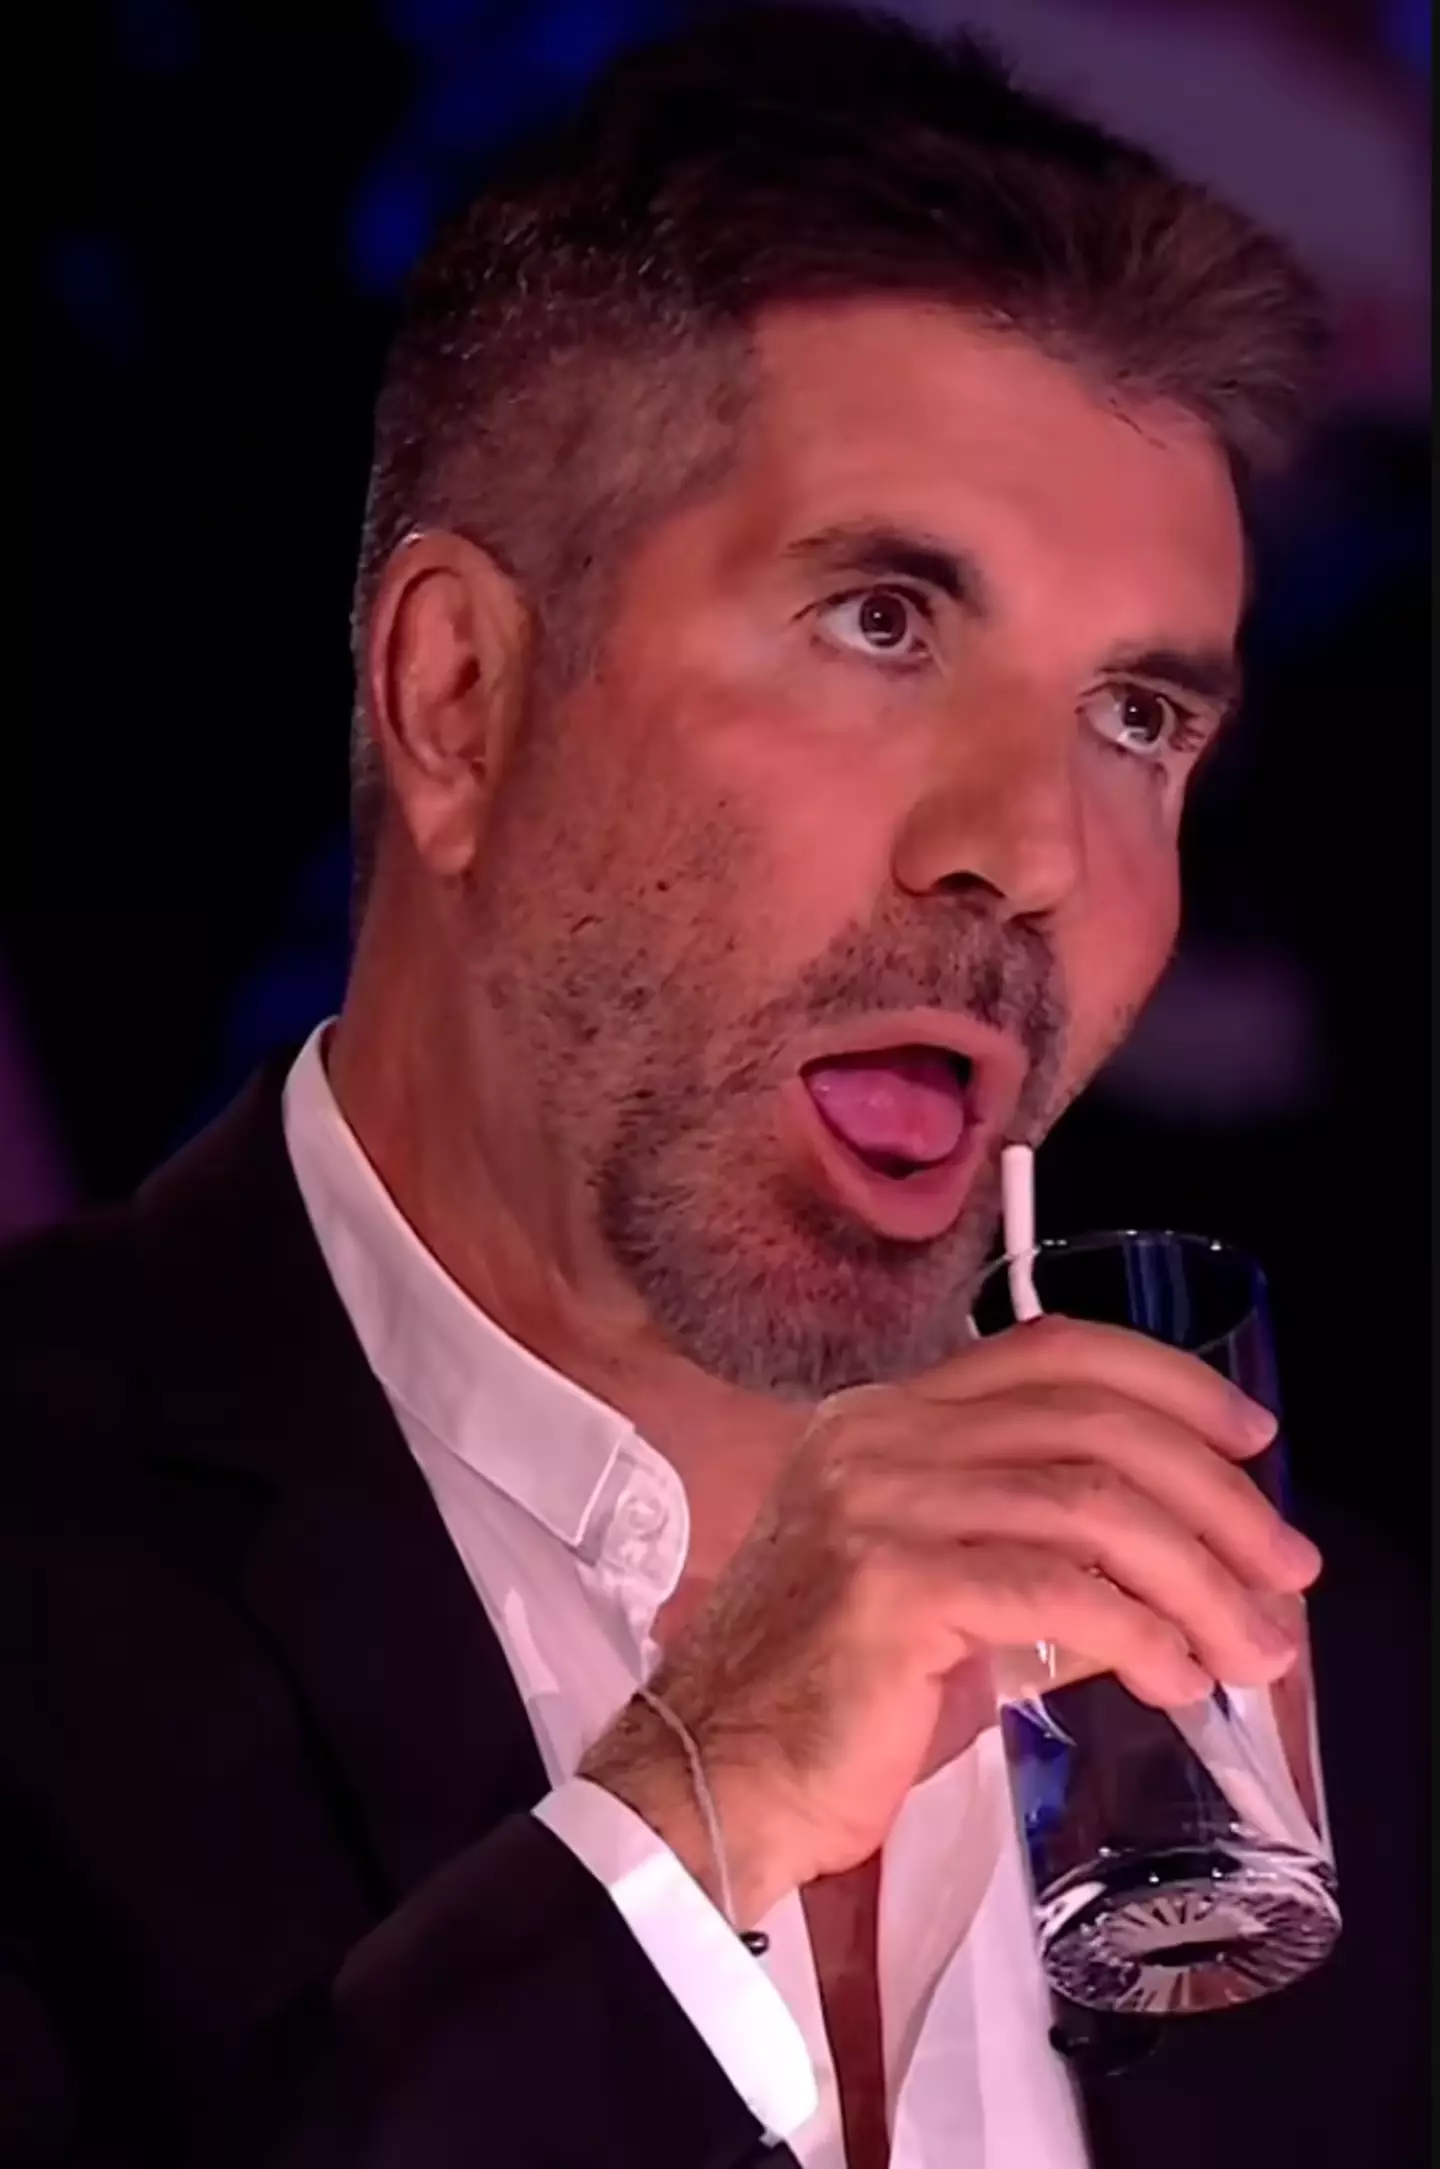 Simon Cowell struggled with a straw during Britain's Got Talent.